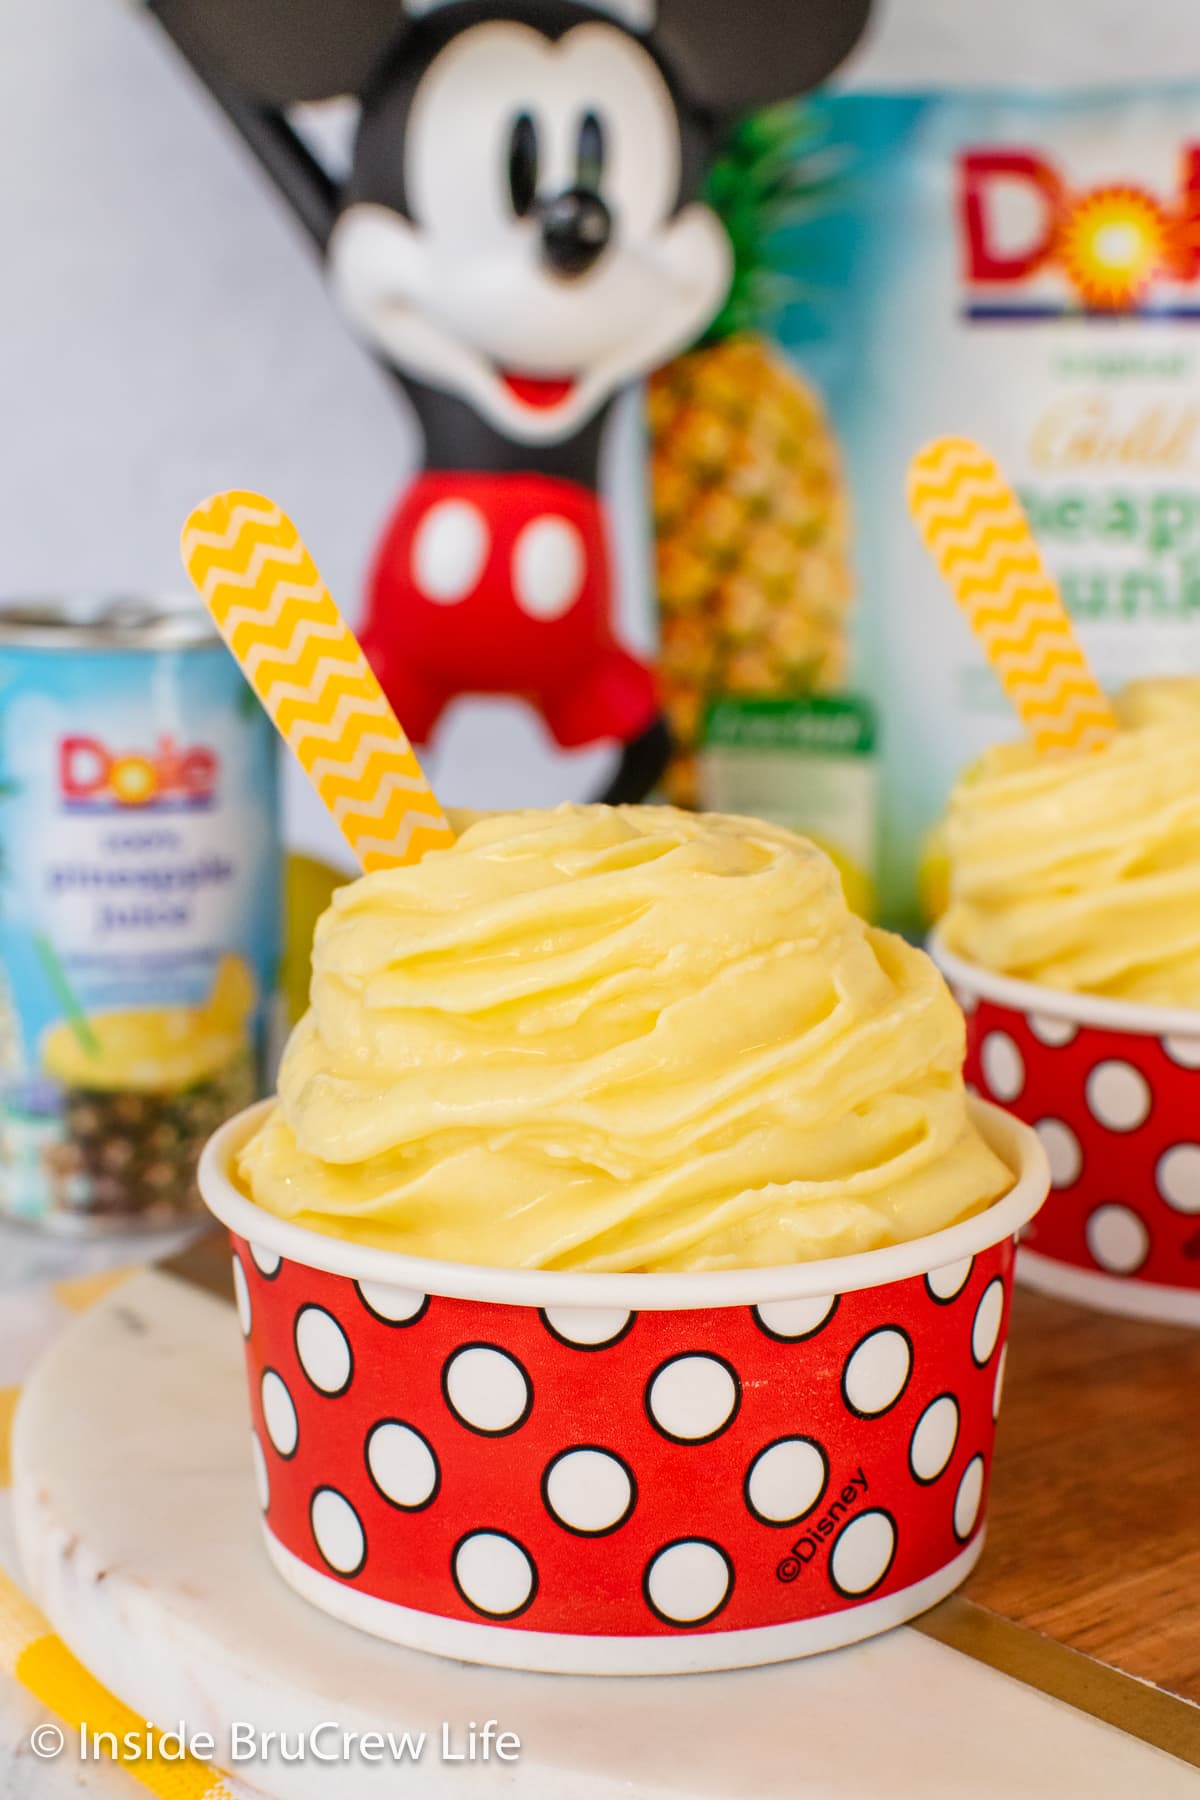 A red and white cup filled with a swirl of pineapple flavored ice cream.